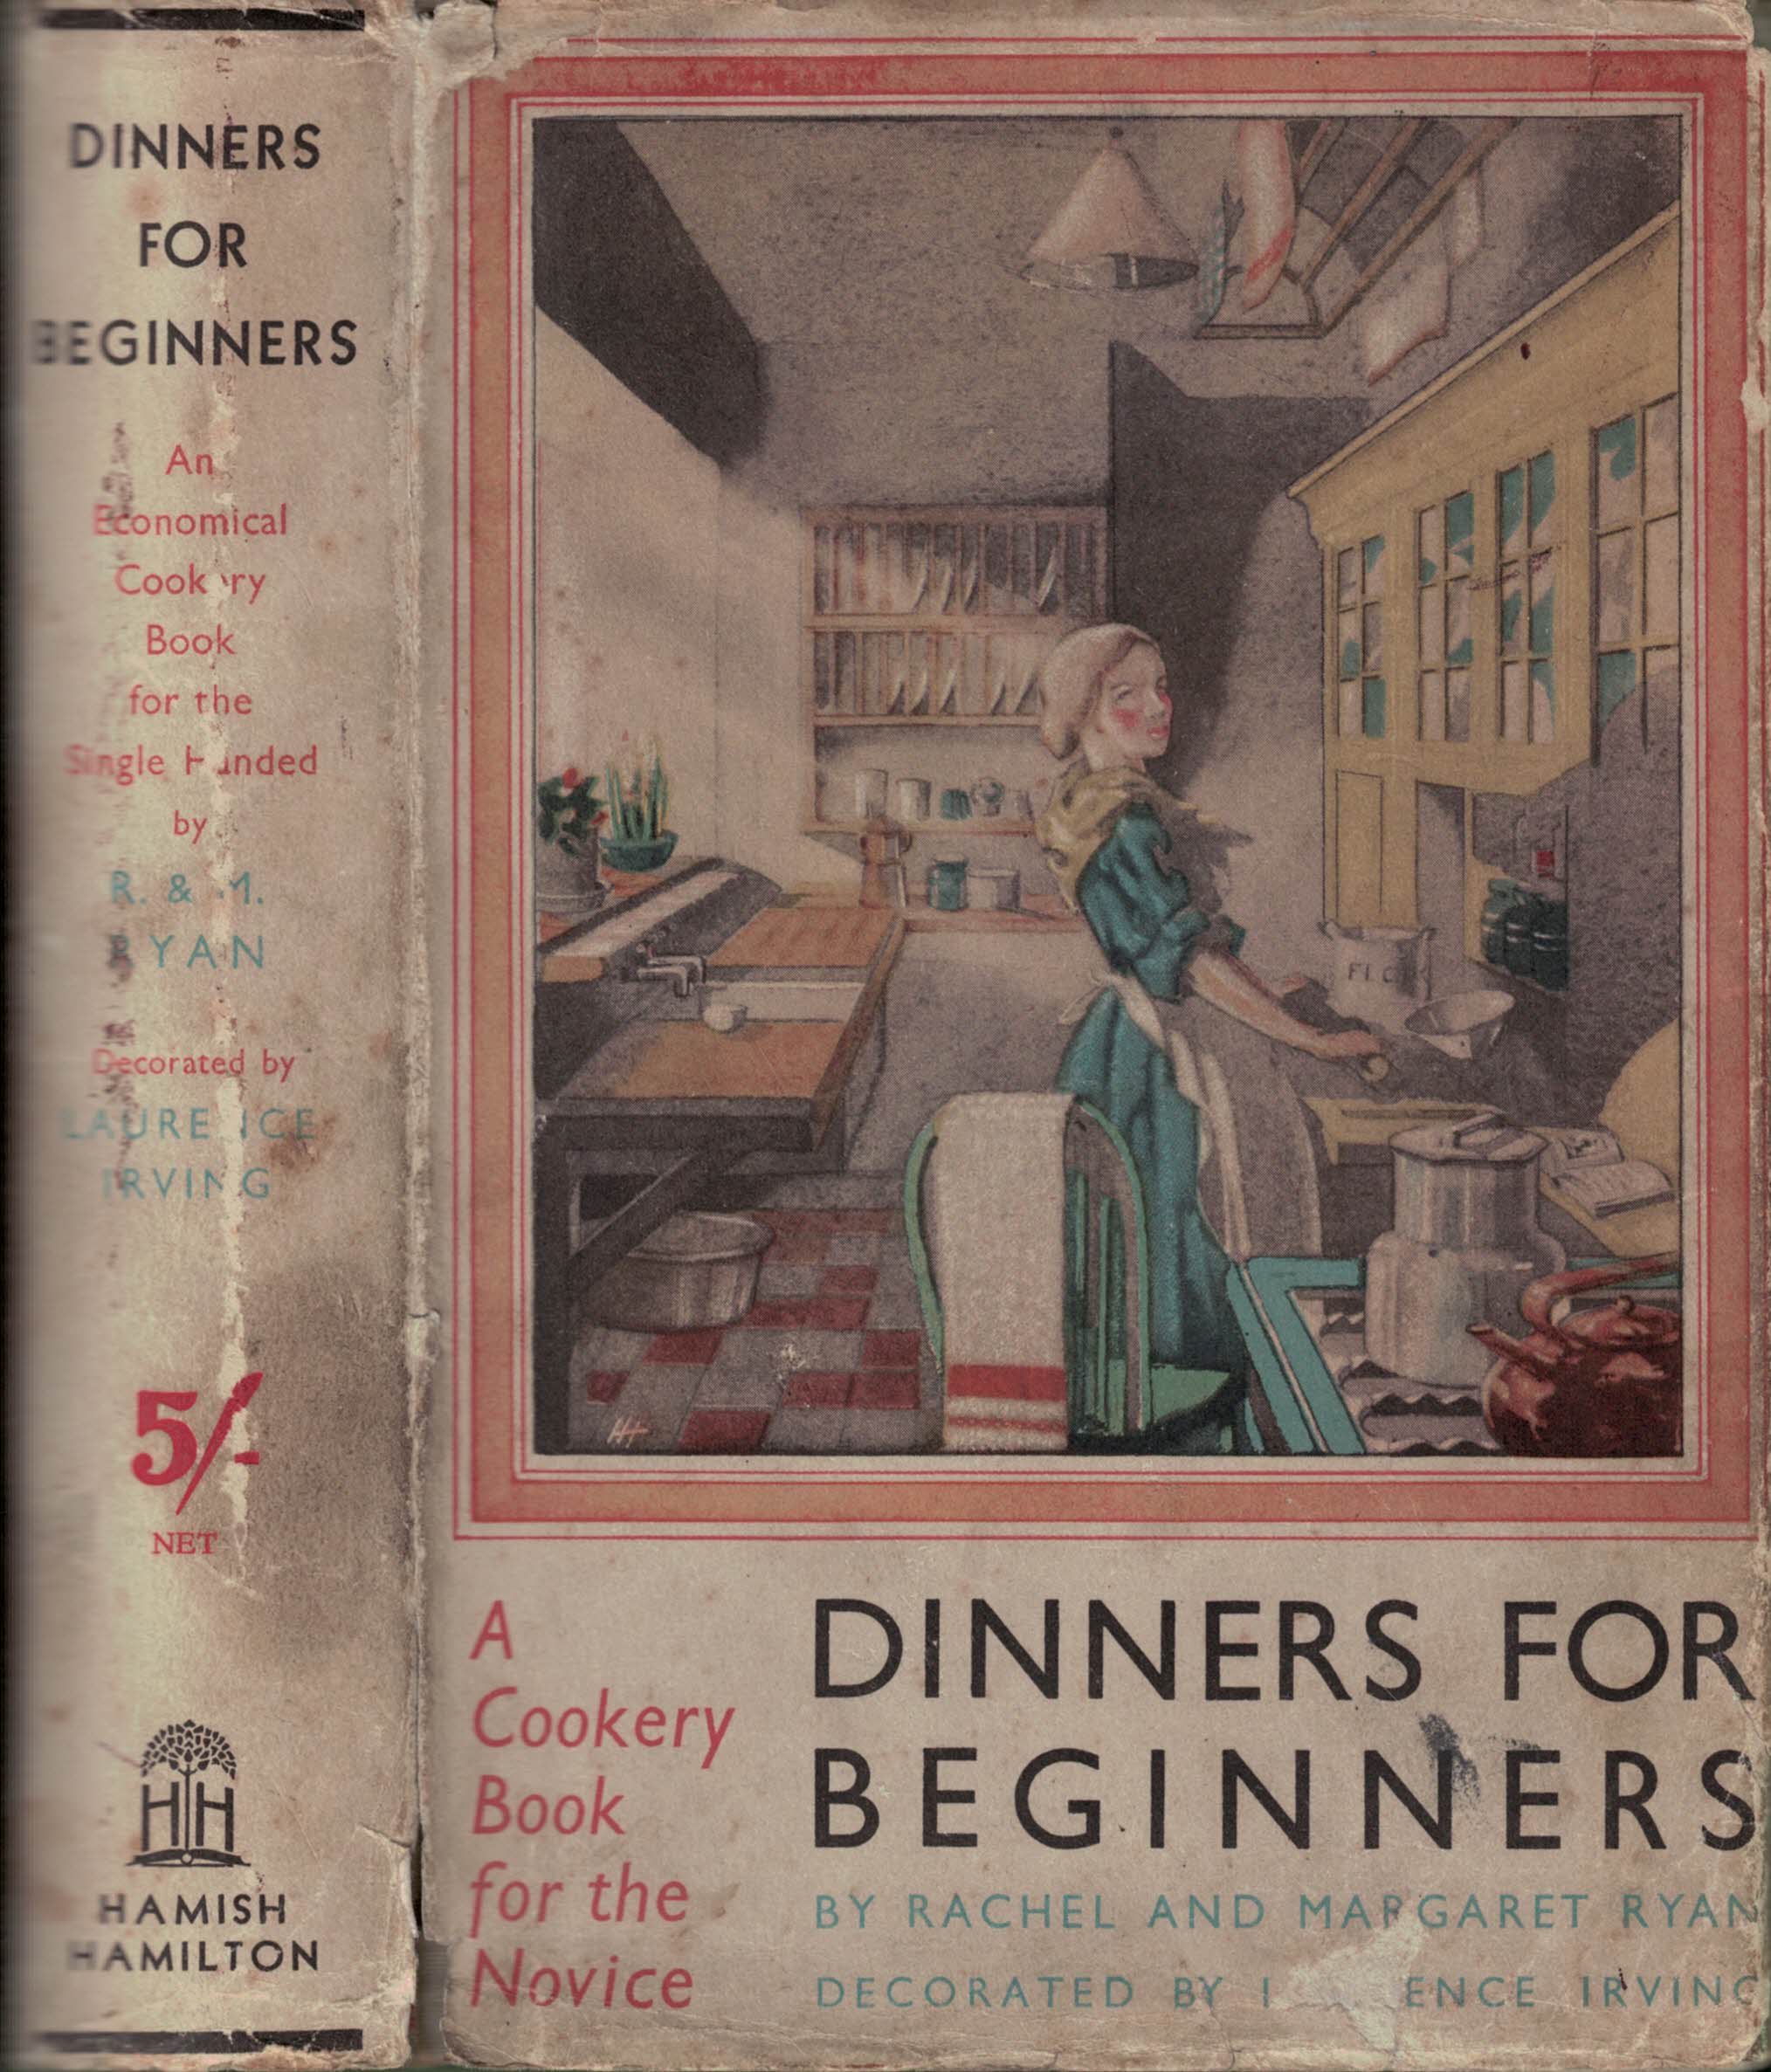 Dinners for Beginners. An Economical Cookery Book for the Single-Handed.